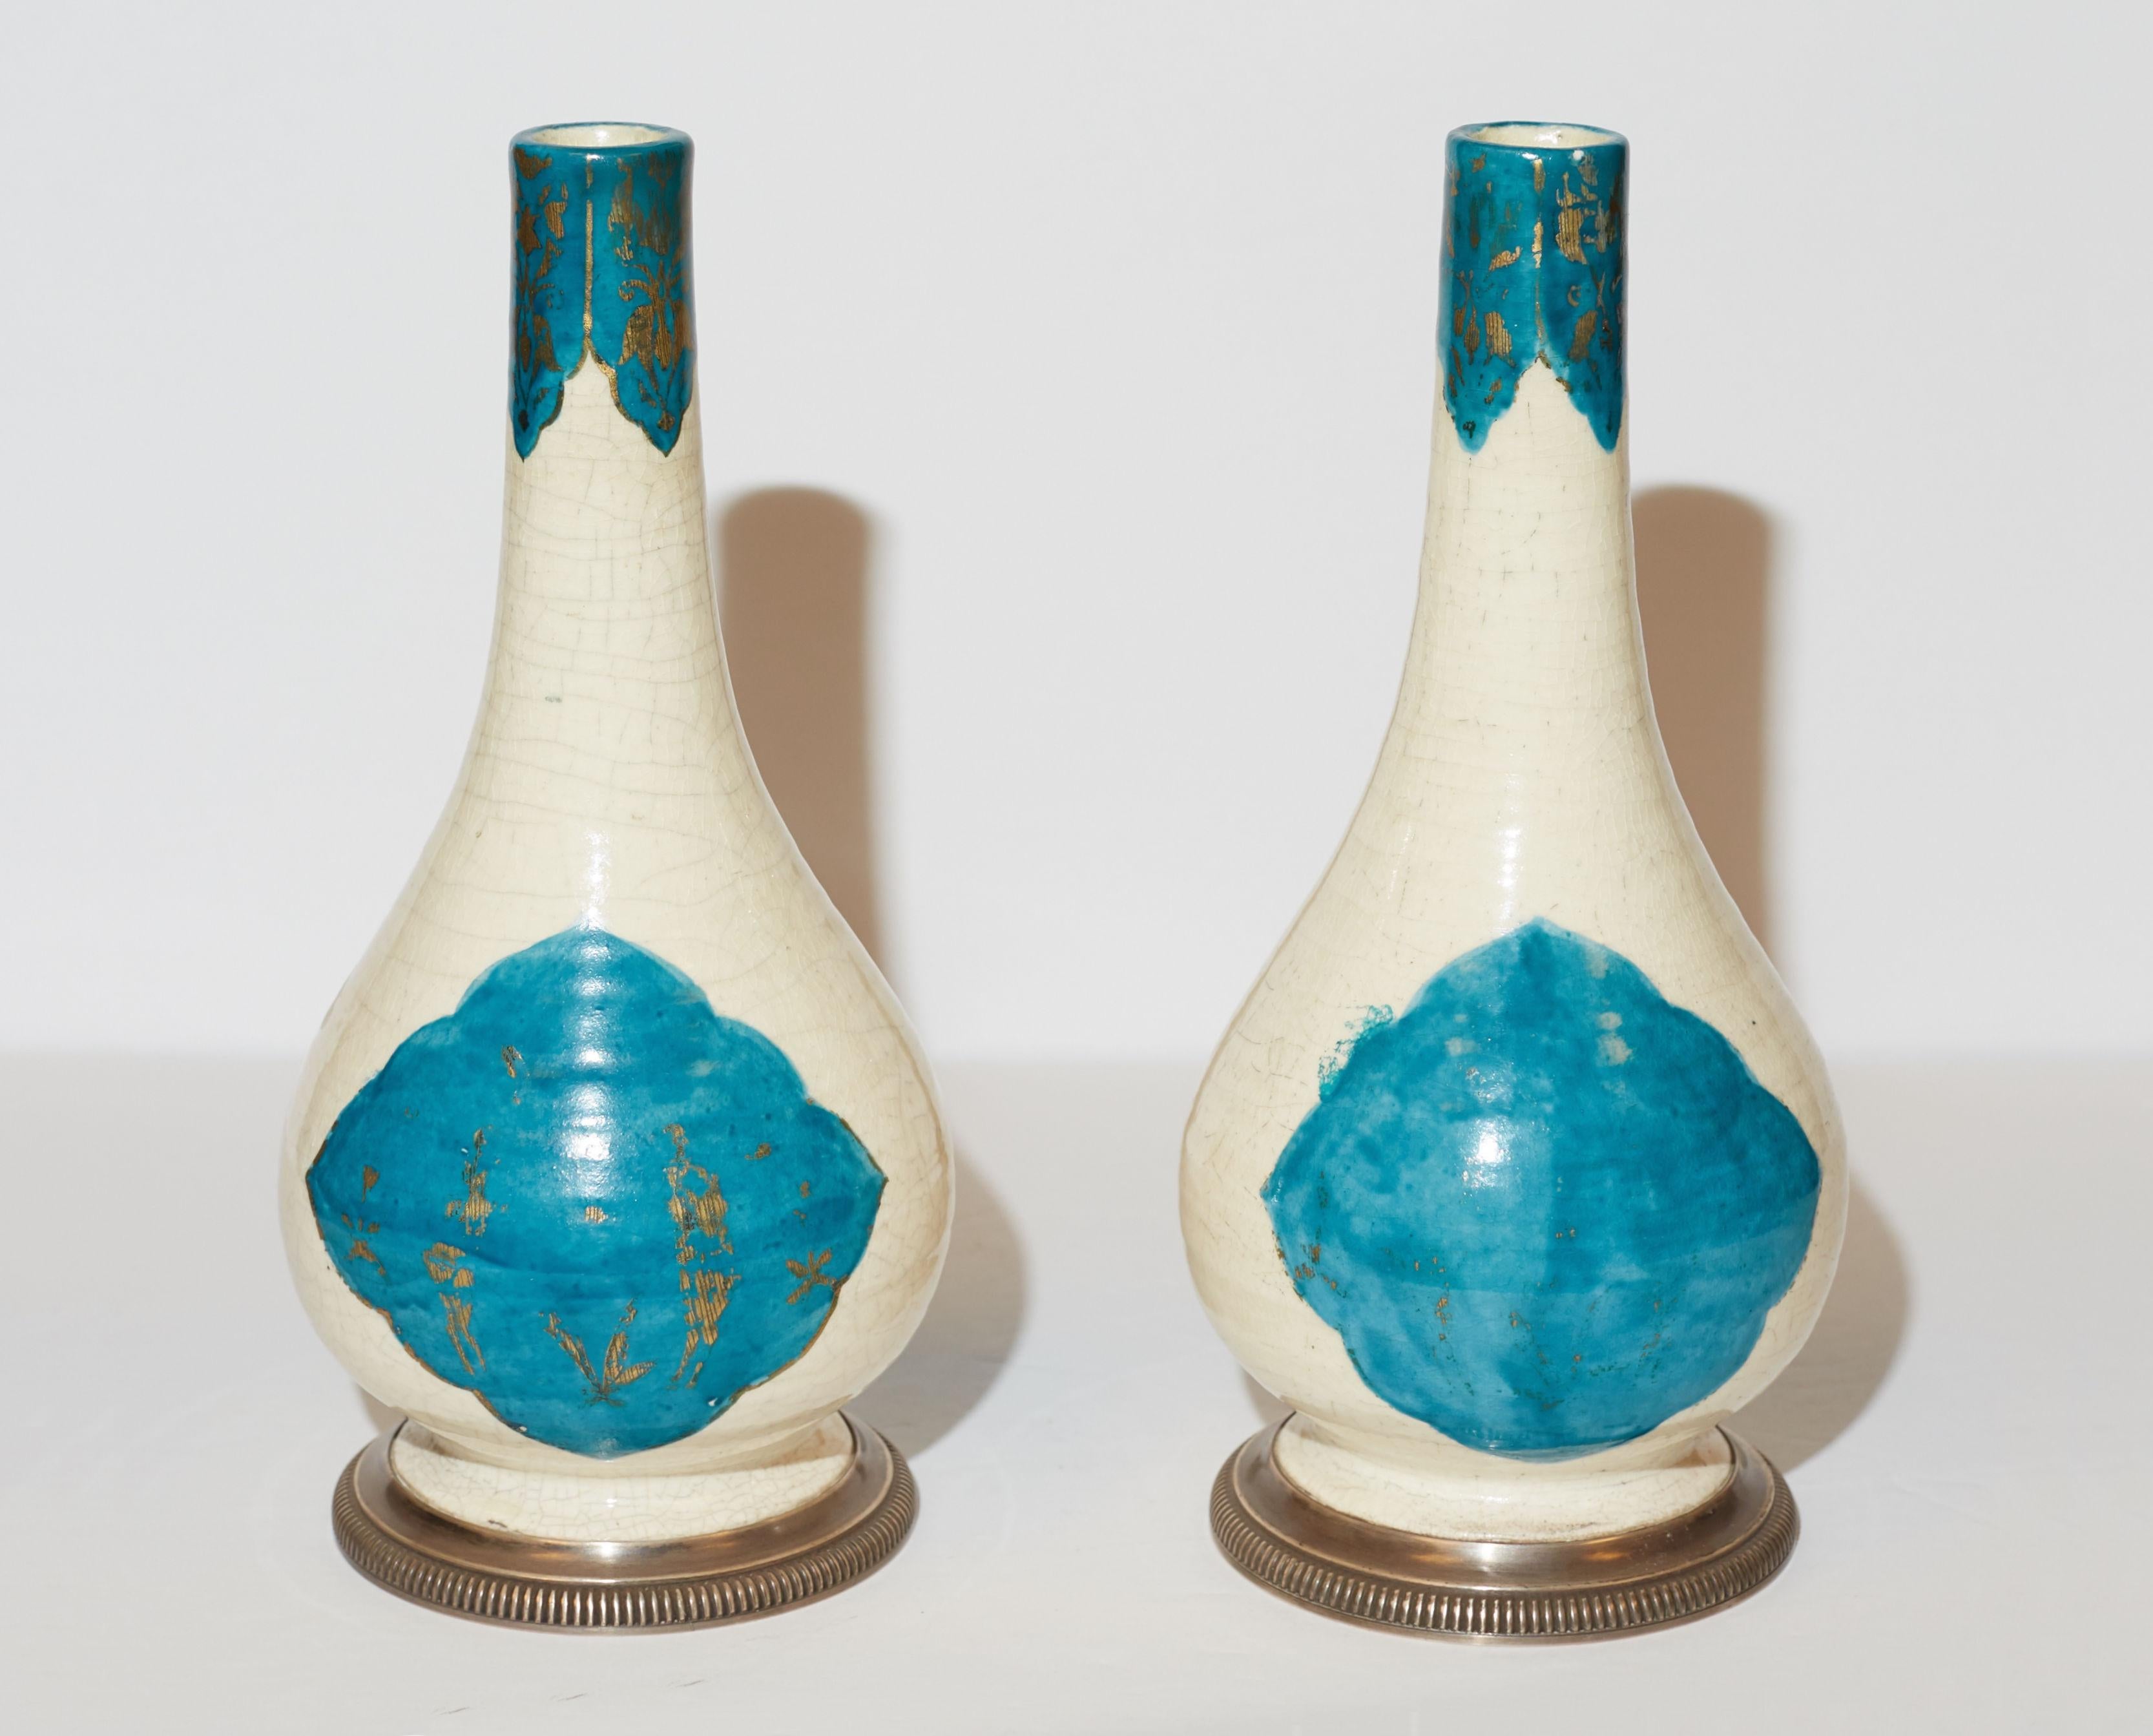 Pair Cartier Silver-Mounted Persian Ceramic Bottle Vases For Sale 7